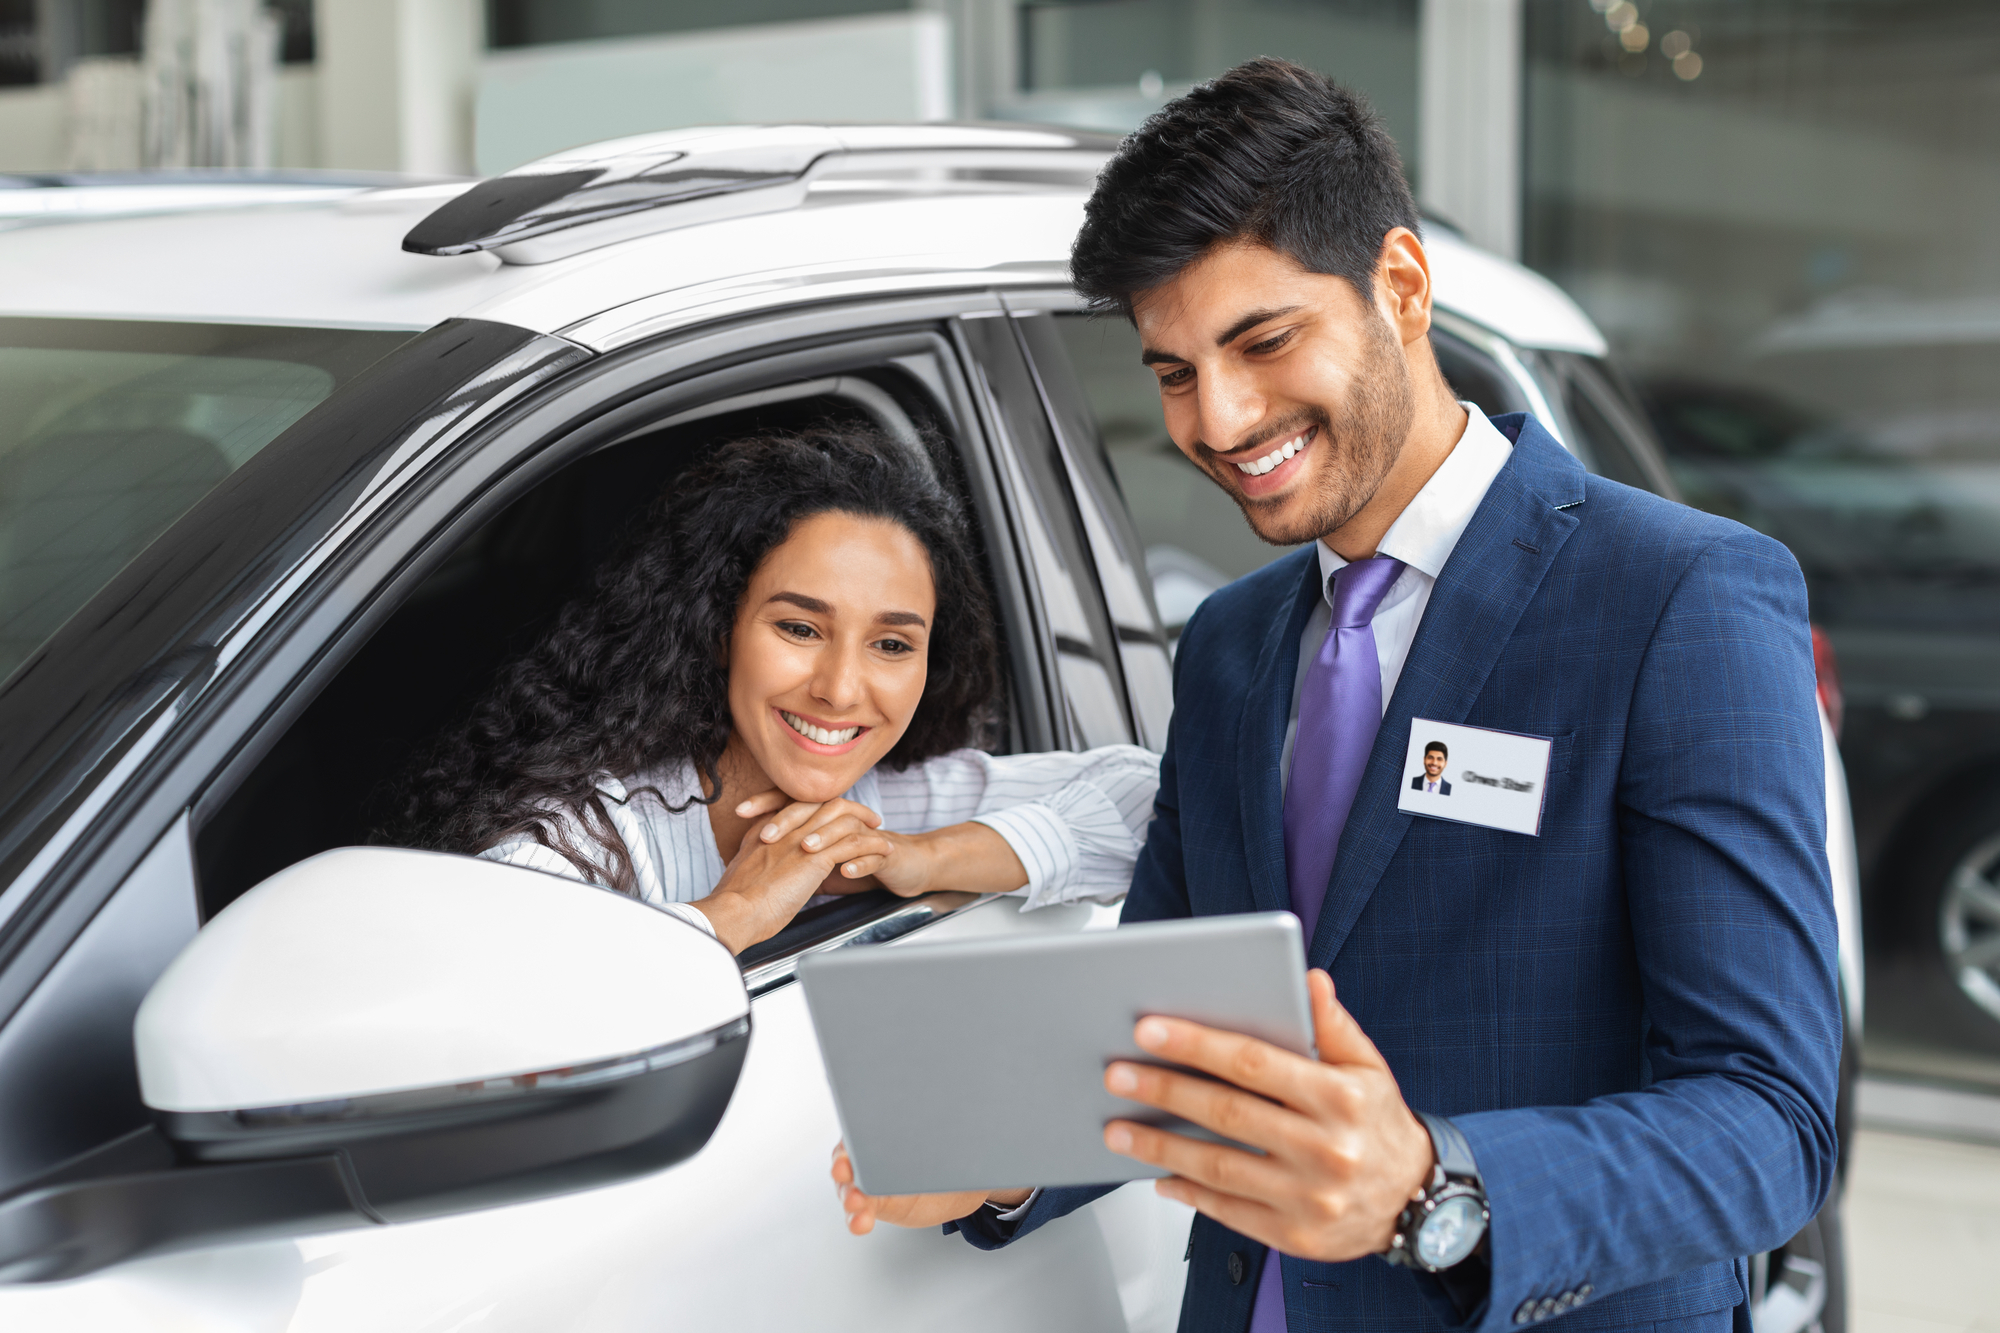 A man and woman exploring a novated lease option by diligently researching various lease terms and conditions on a tablet inside a car showroom.